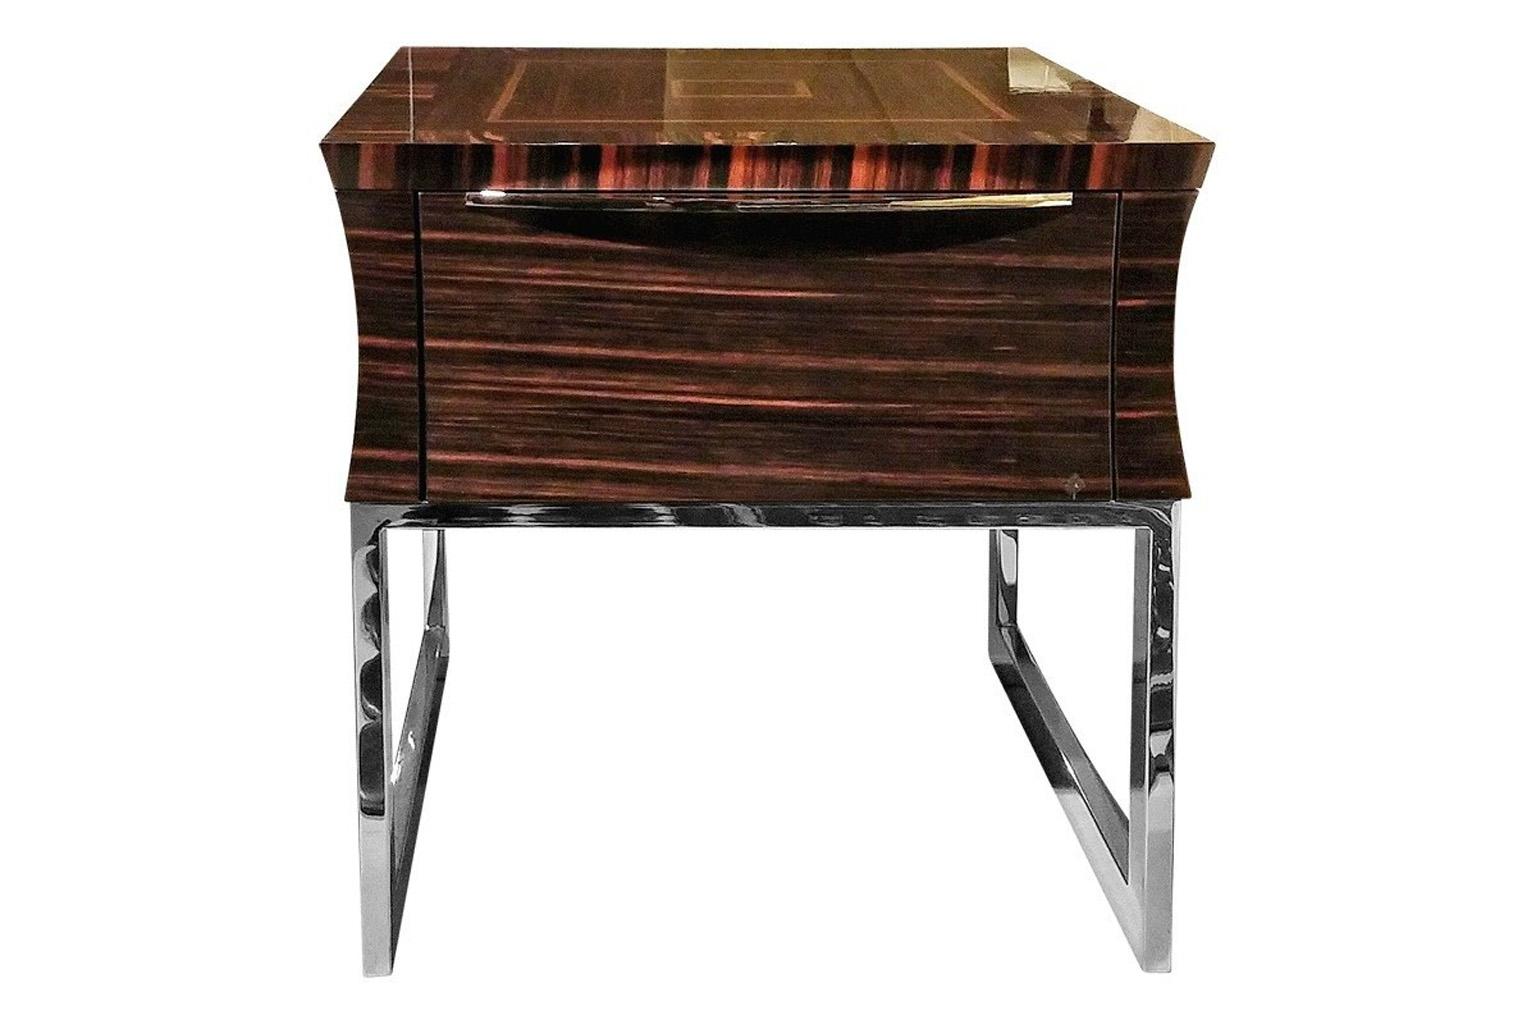 Unique Square wooden end table in makassar ebony veneer in glossy finish.
One full extension drawer with bottom in velvet fabric.
Handle and base in polished stainless steel.

Width 21.50